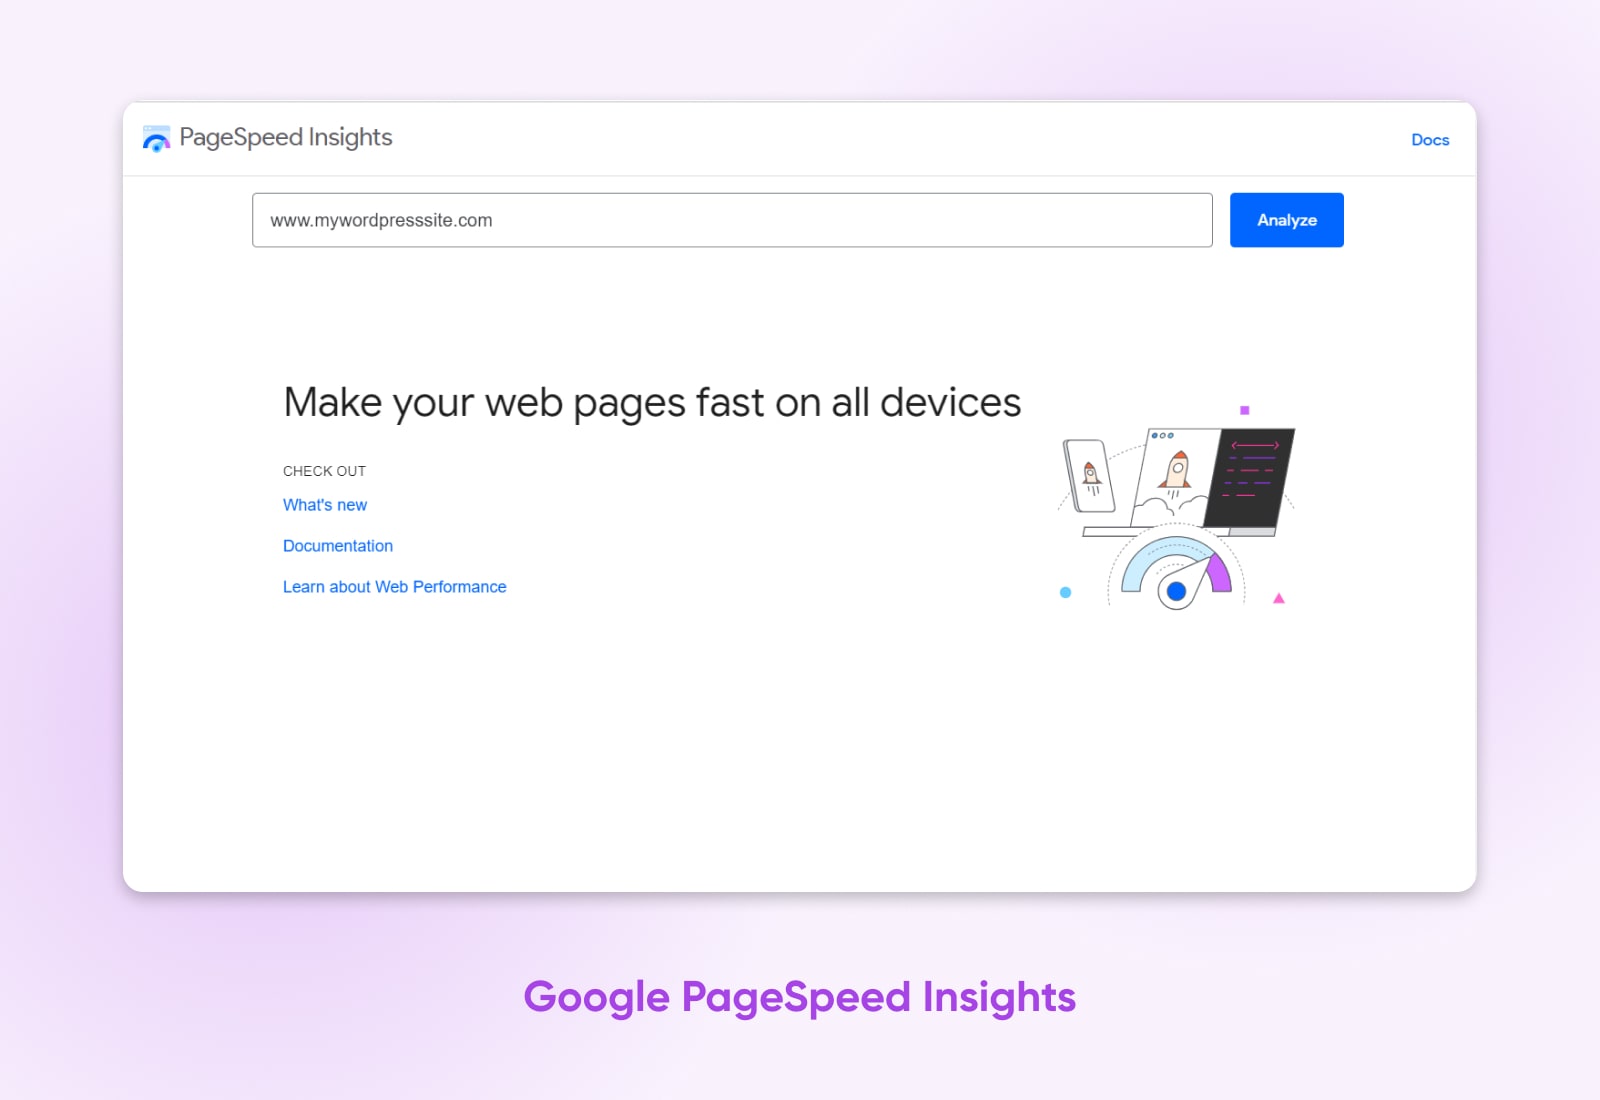 Screenshot from Google PageSpeed Insights